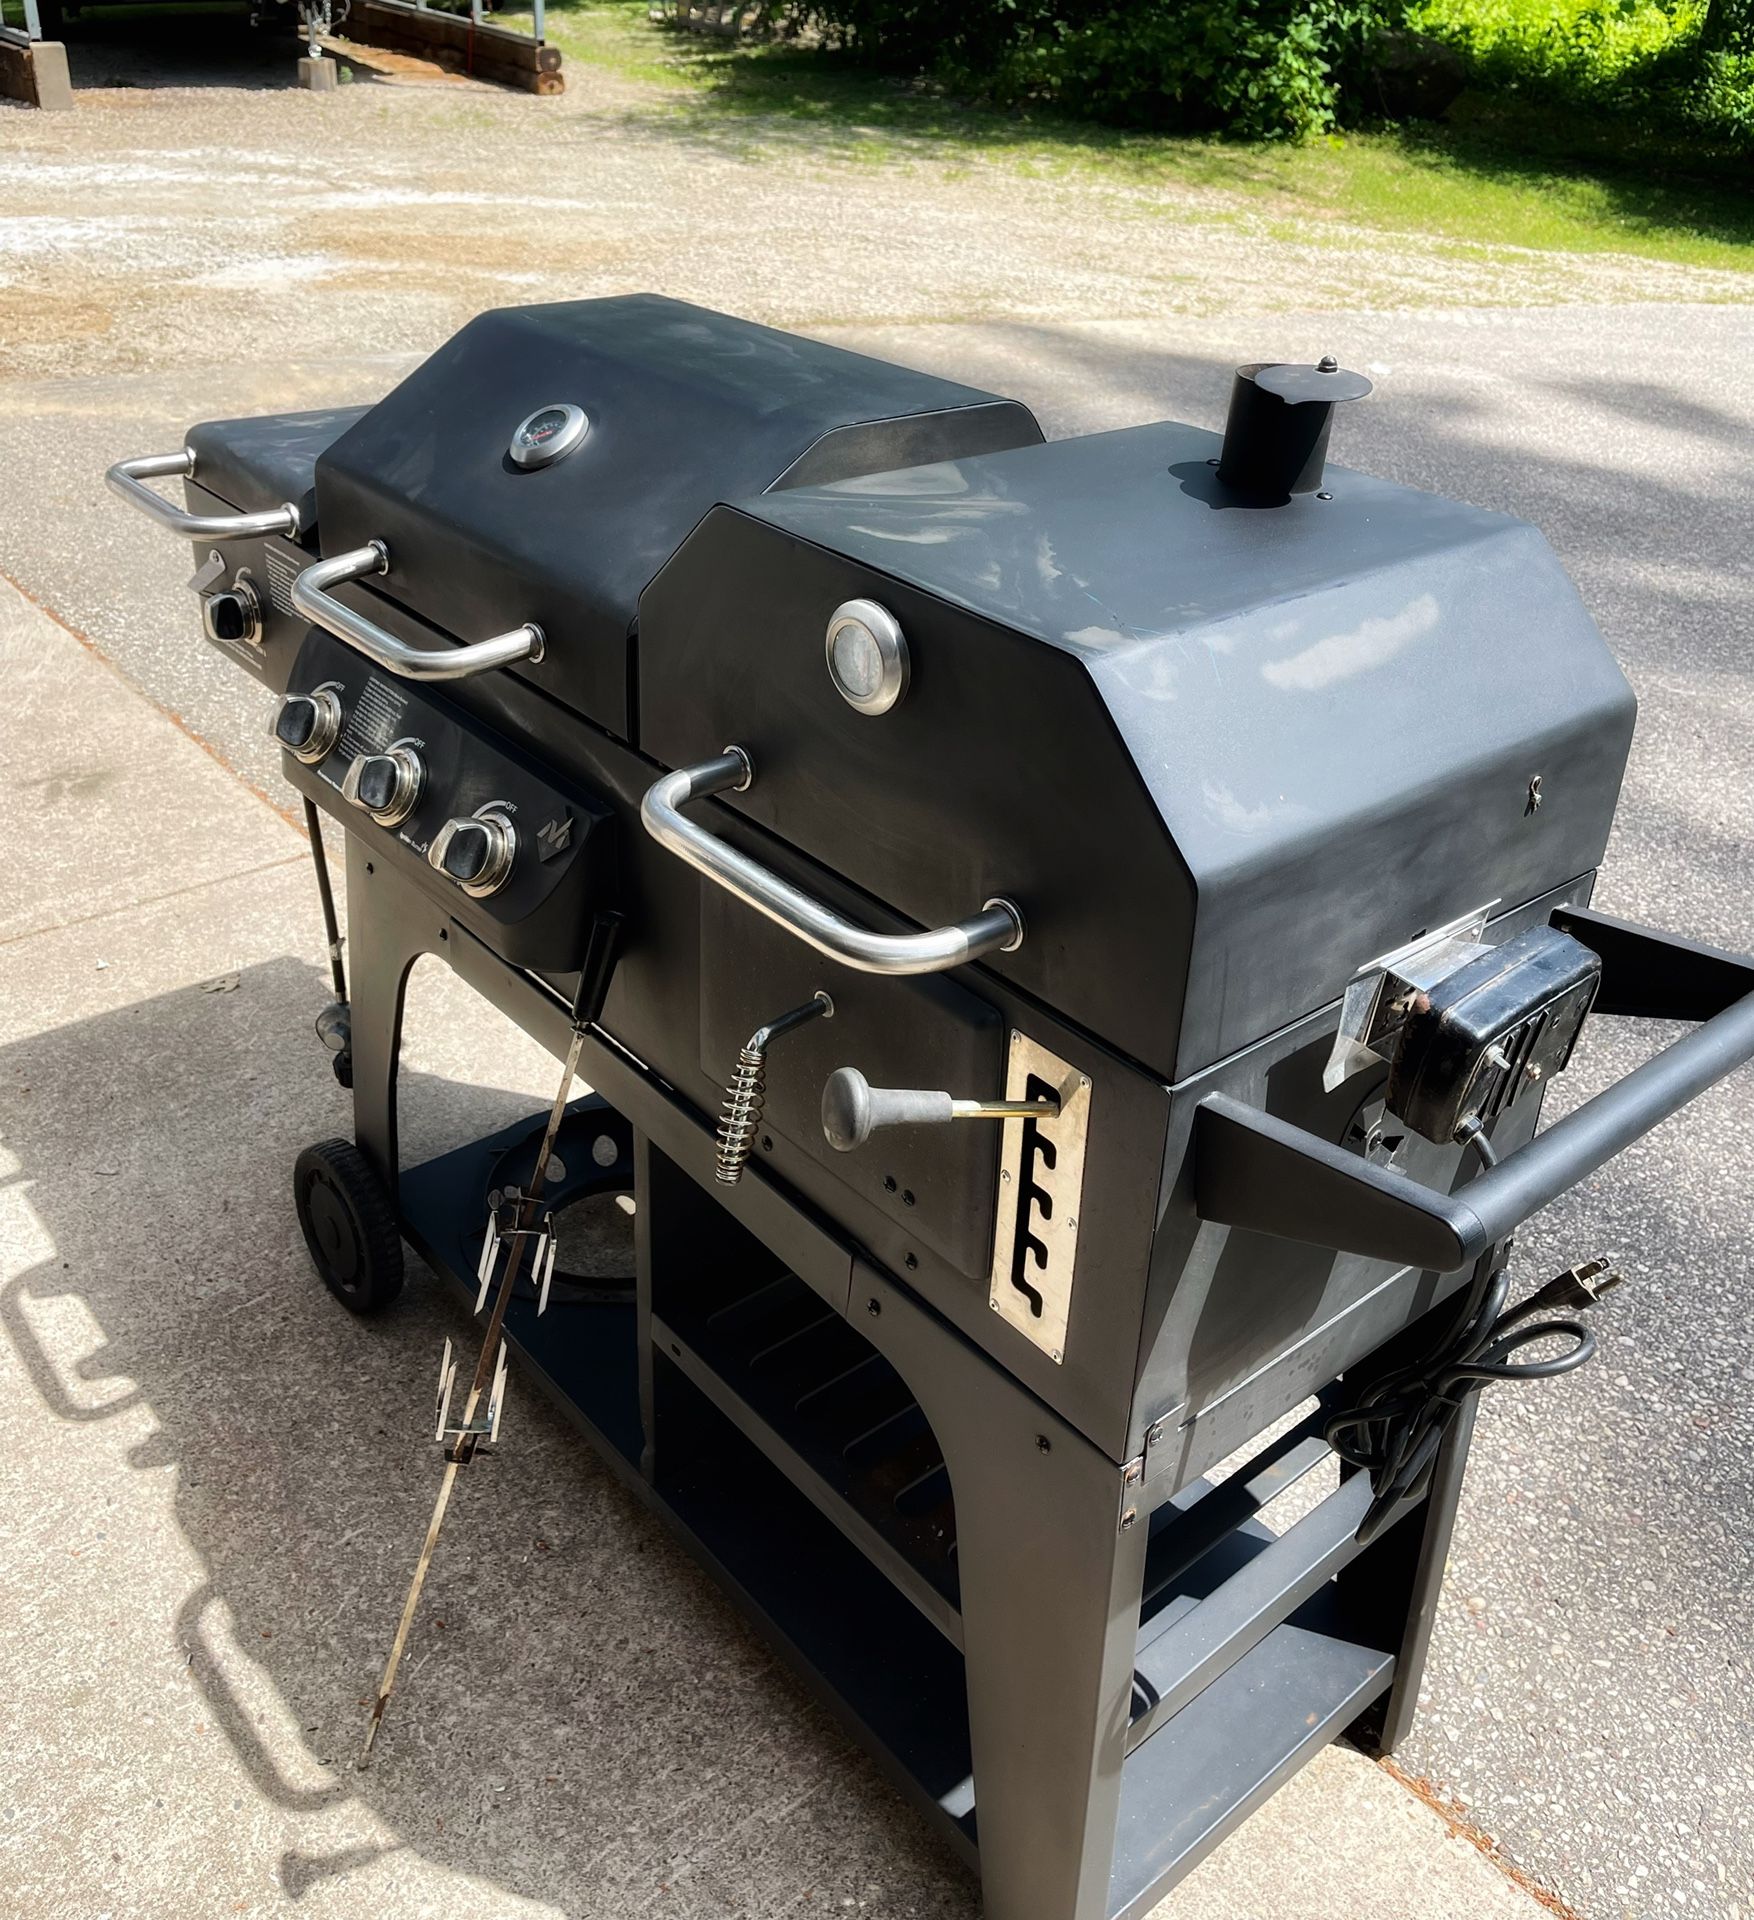 Gas and charcoal grill